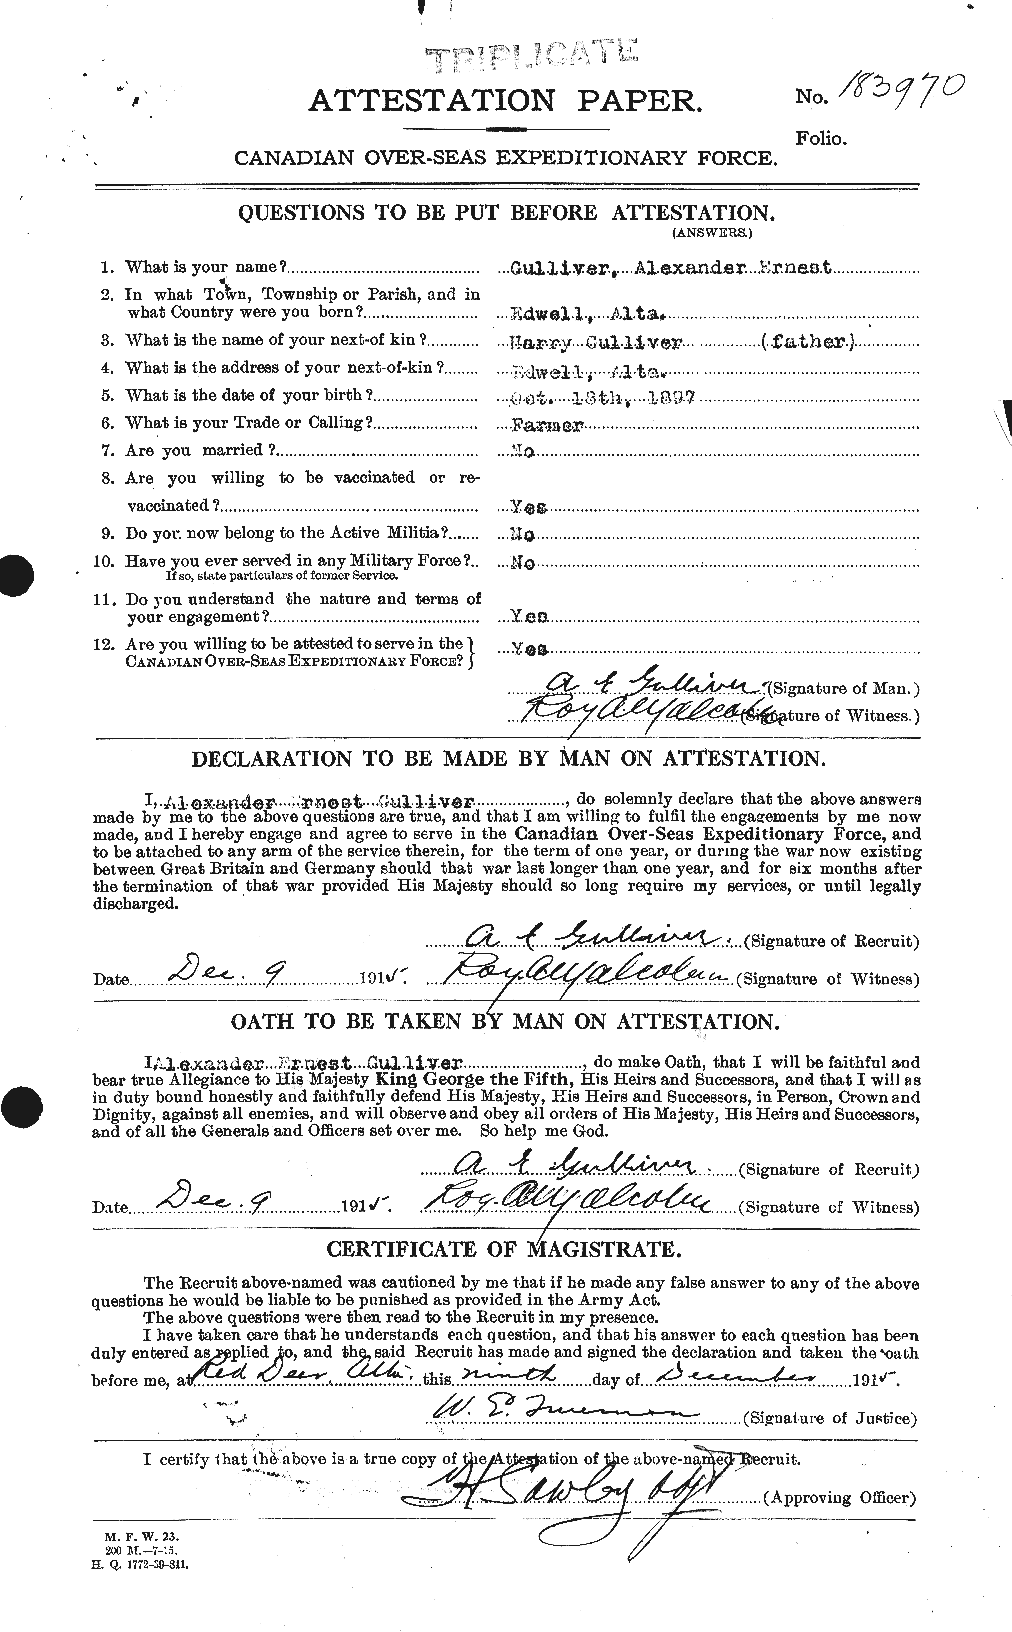 Personnel Records of the First World War - CEF 367903a